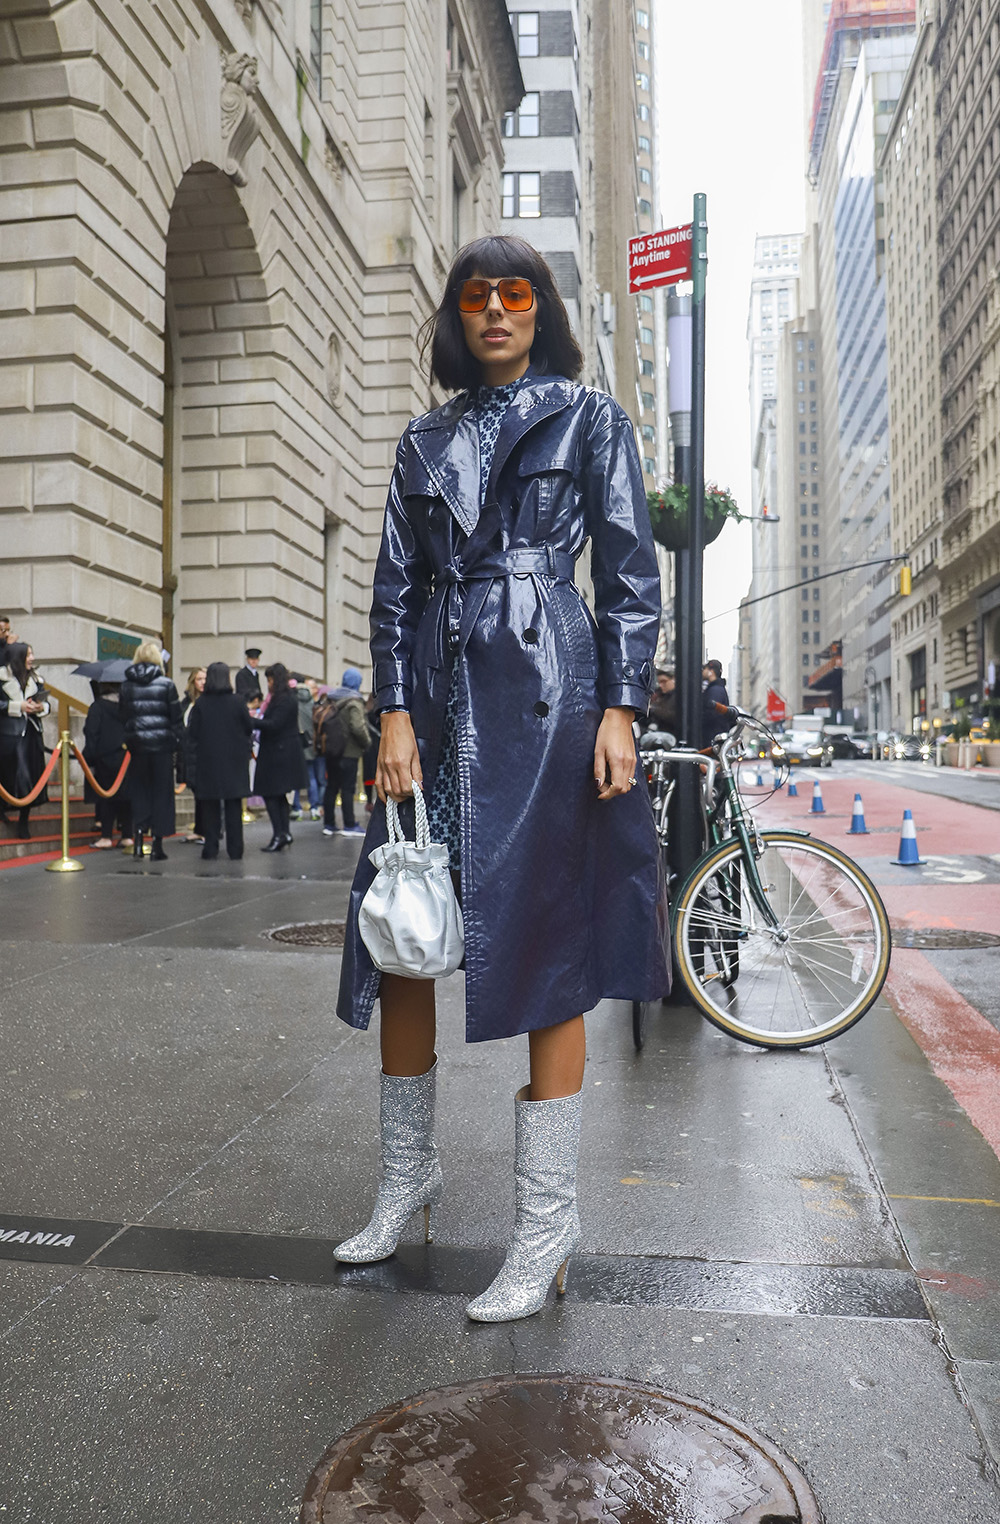 NEW YORK, NY - FEBRUARY 08: Babba Rivera is seen wearing a blue Kate Spade coat and dress and silver Brother Veilles boots on the street during New York Fashion Week on February 8, 2019 in New York City. (Photo by Achim Aaron Harding/Getty Images)